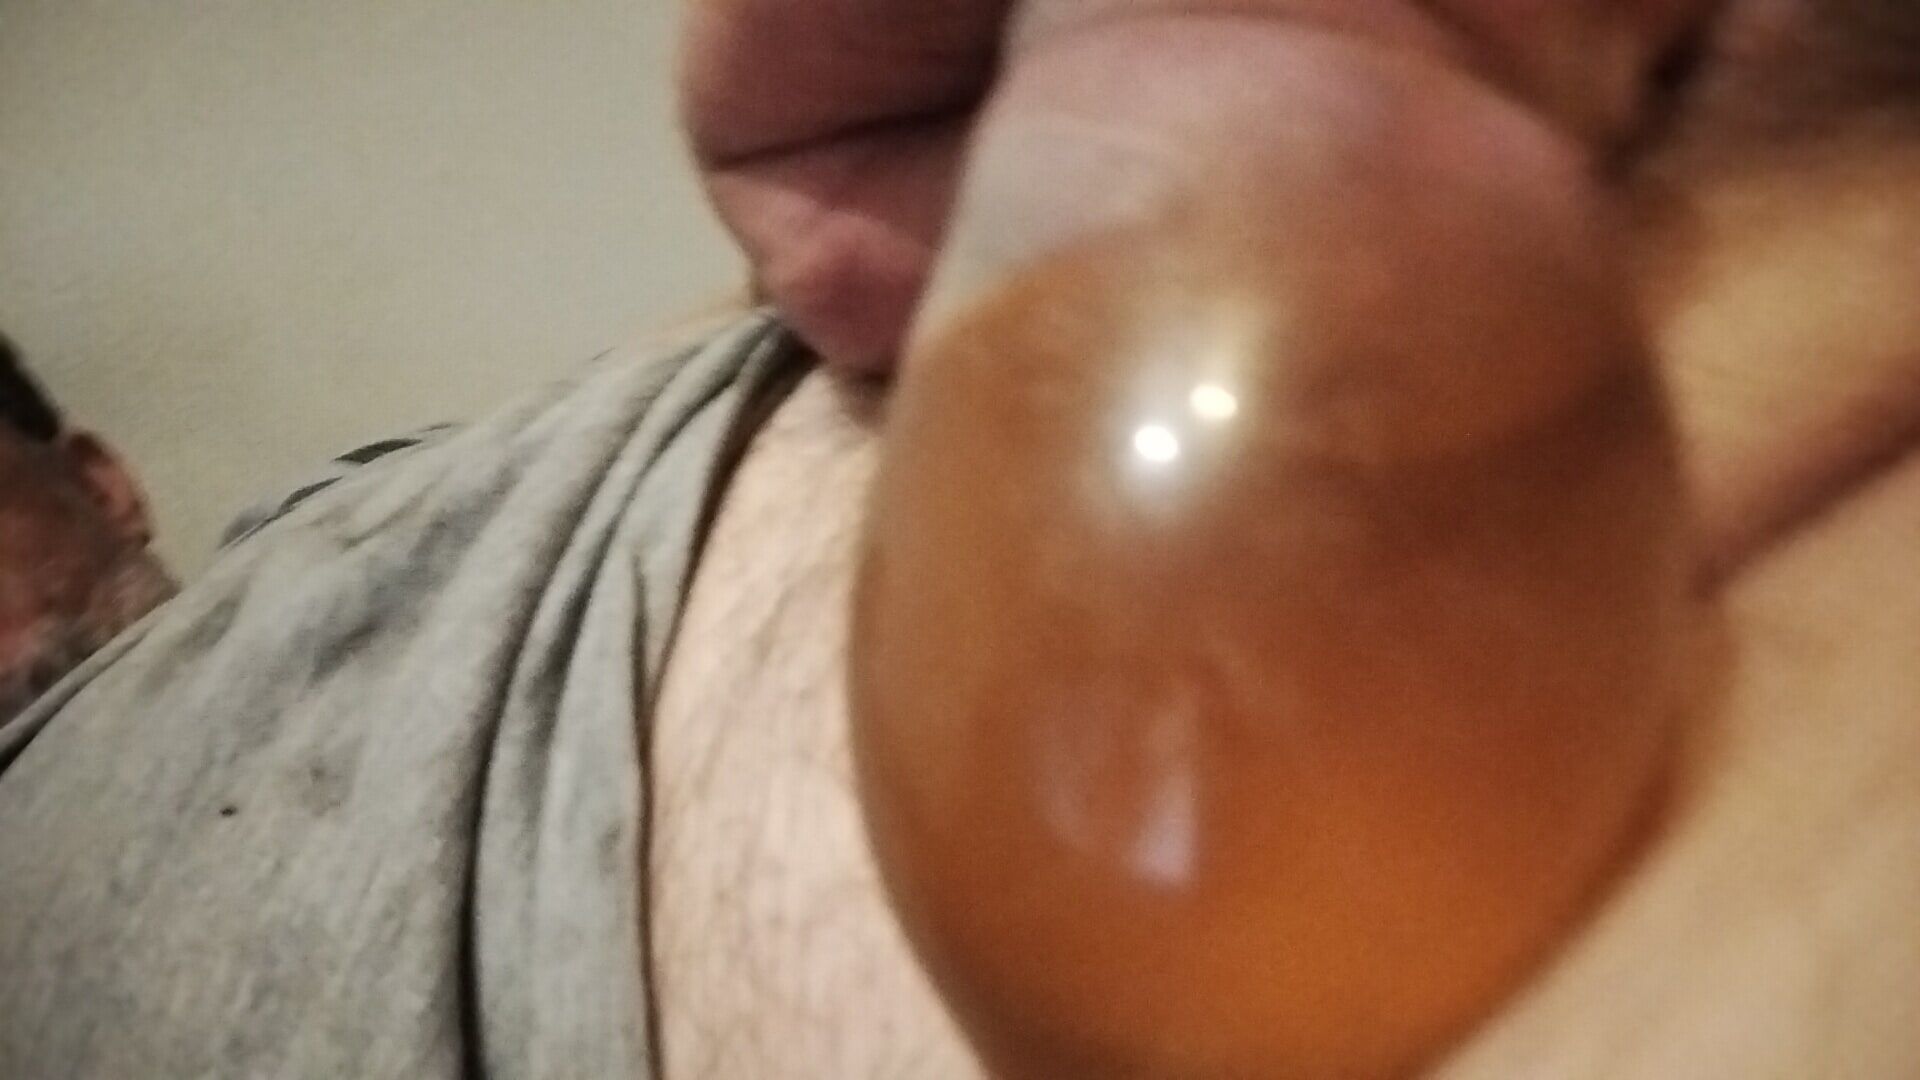 Putting a condom on and making myself fill it up with piss  #8